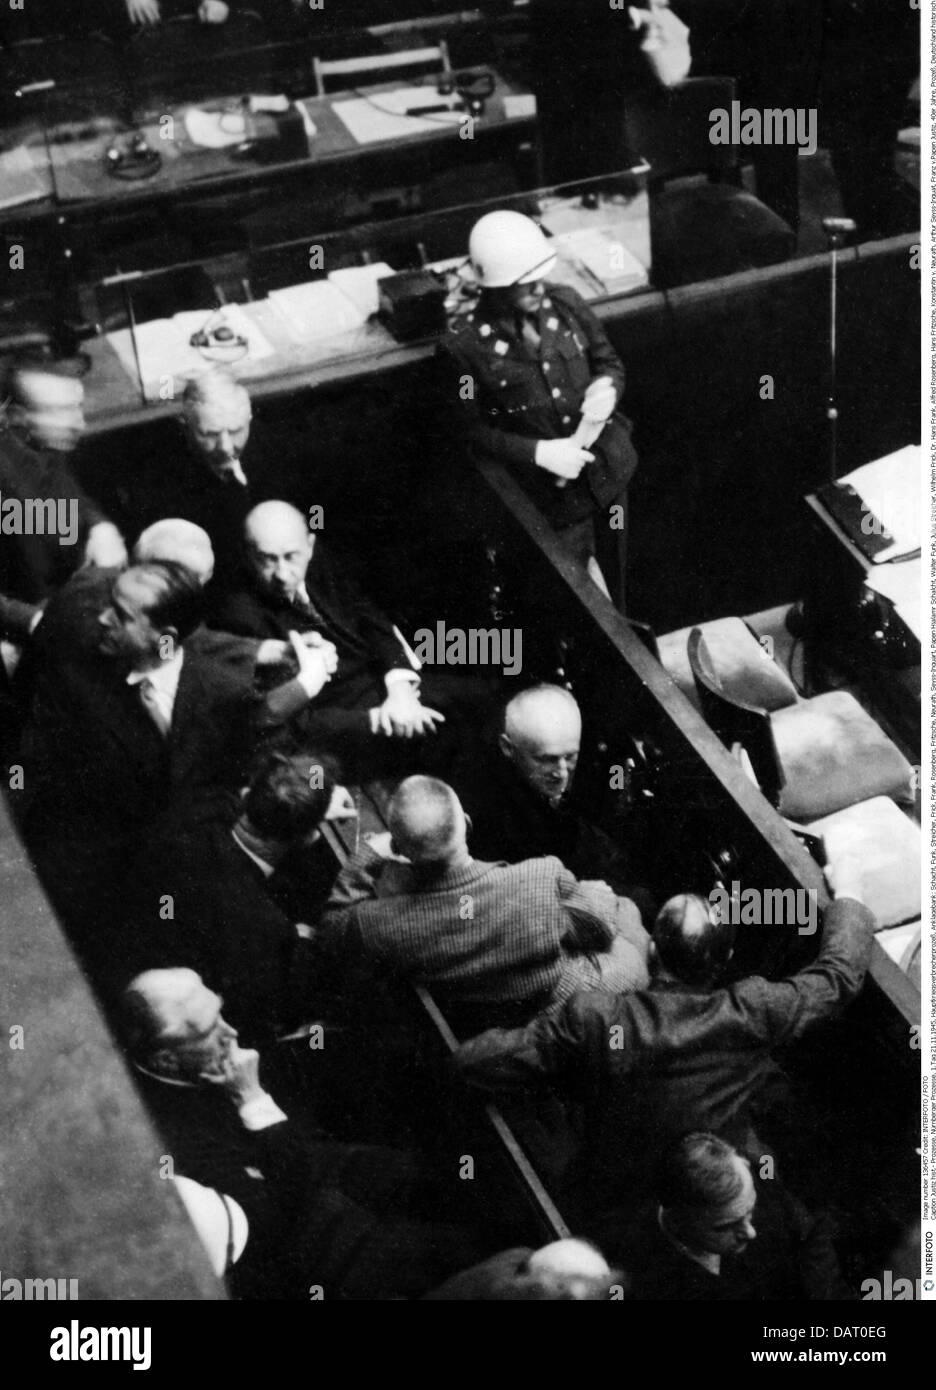 justice,trials,Nuremberg Doctors' Trial 25.10.1946 - 20.8.1947,dock,with the defendants Schacht,Funk,Streicher,Frick,Frank,Rosenberg,Fritzsche,Neurath,Seyss-Inquart,Papen on the first day of the trial,21.11.1945,1940s,40s,20th century,historic,historical,lawsuit,lawsuits,Germany,Third Reich,war criminals,Nazis,Second World War,WWII,postwar period,NS,National Socialism,Nazism,German Reich,Hjalmar Schacht,Walter Funk,Julius Streicher,Wilhelm Frick,Dr. Hans Frank,Alfred Rosenberg,Hans Fritzsche,Konstantin von Neurath,Arthur,Additional-Rights-Clearences-Not Available Stock Photo